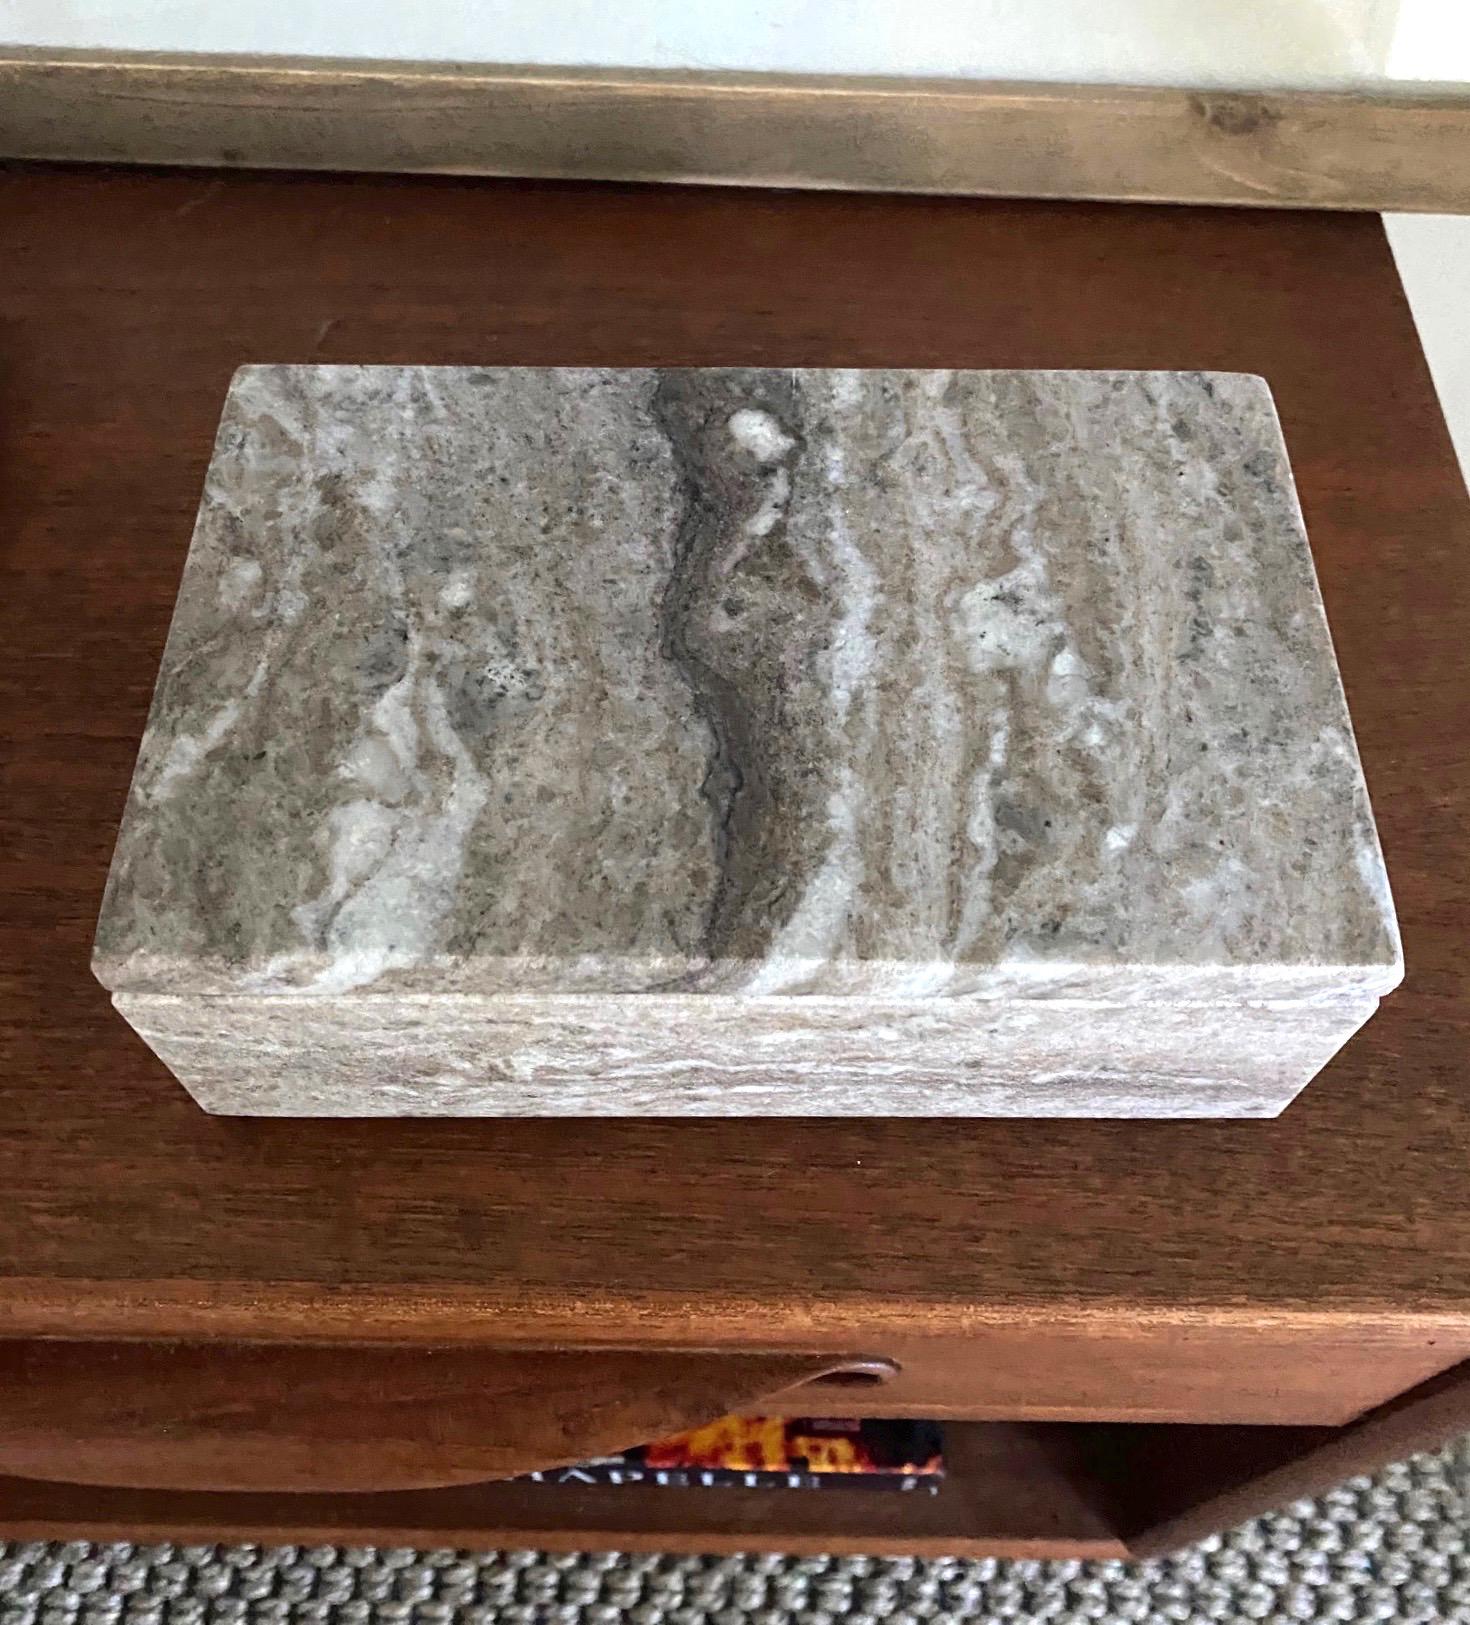 Hand-Carved Marble Stone Box with Stripes in Brown, Grey, and White